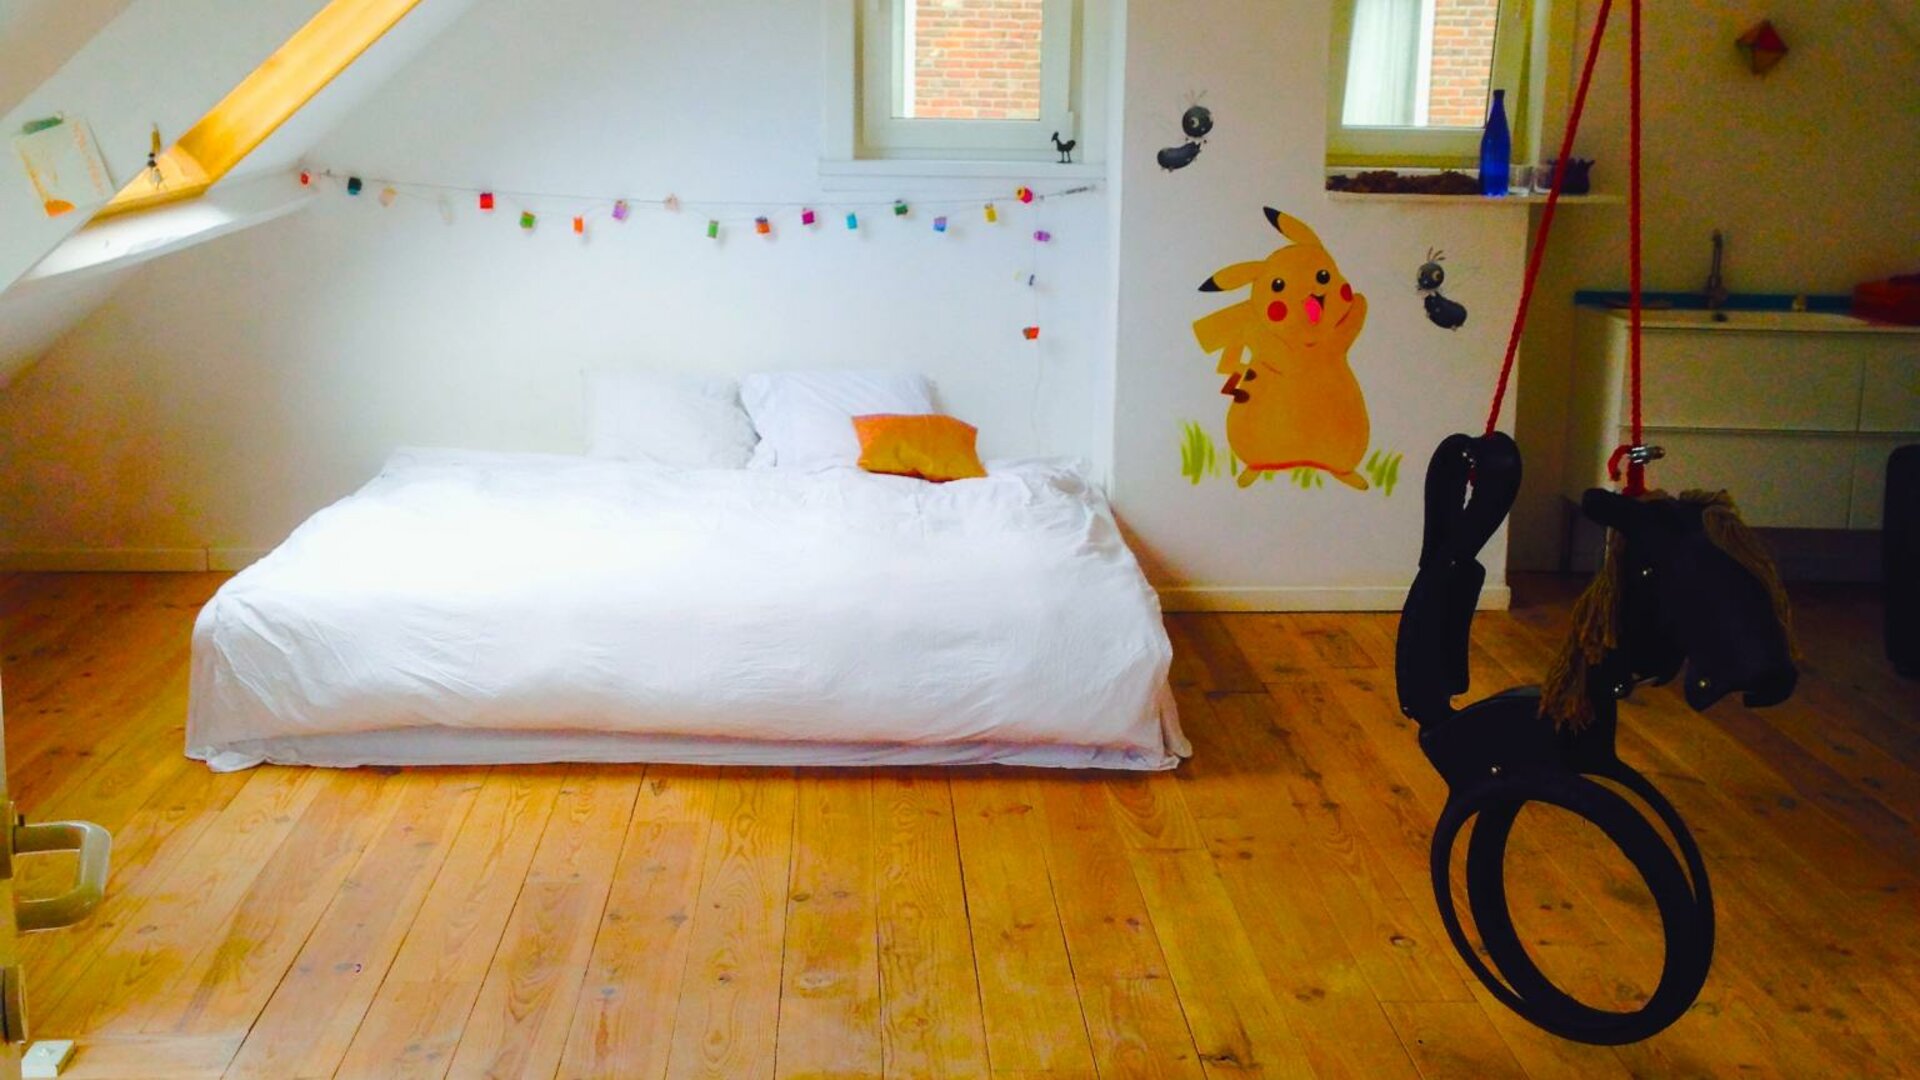 Fun place for kids and grown-ups - Master bedroom